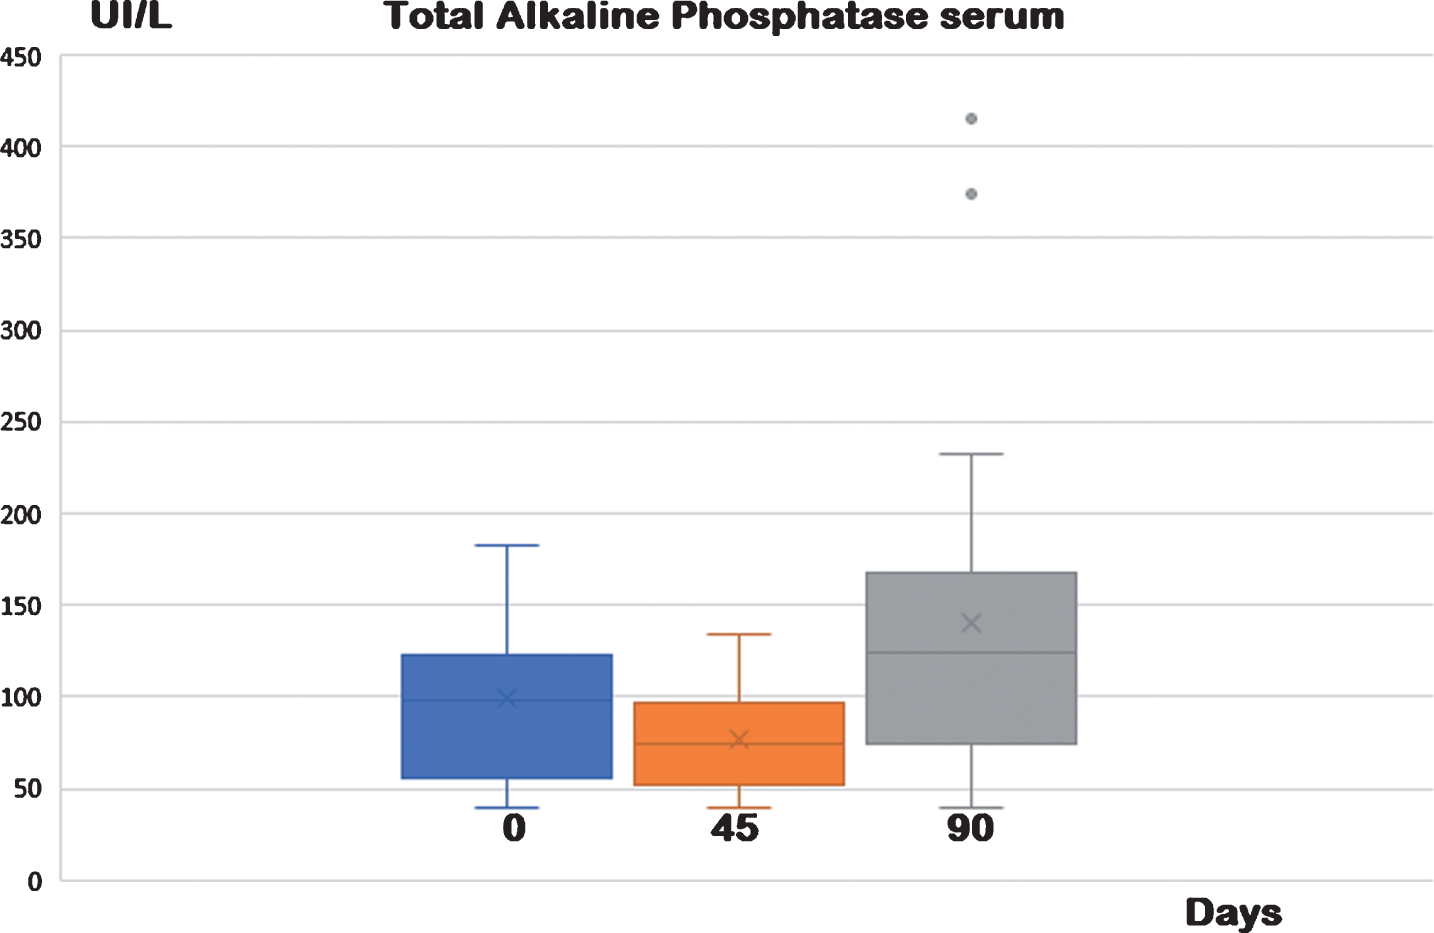 Serum Alkaline Phosphatase at different times and treatments. Animals were observed for two consecutive periods of 45 days, where the basic diet was added or not with a food supplement containing antioxidants (30 mg resveratrol and 20 UI α-tocopherol acetate). From the results of statistical elaboration, it has been shown that food supplementation with antioxidants (resveratrol and α-tocopherol acetate) can modulate positively the alkaline phosphatase. After 45 days of supplementation, there was a statistically significant reduction of serum concentrations of total alkaline phosphatase. These values returned to baseline after a further 45 days of basal diet without supplementation (control). Also, in this case the increase was statistically significant, while no difference was observed between baseline and data at day 90, (see Table 2).